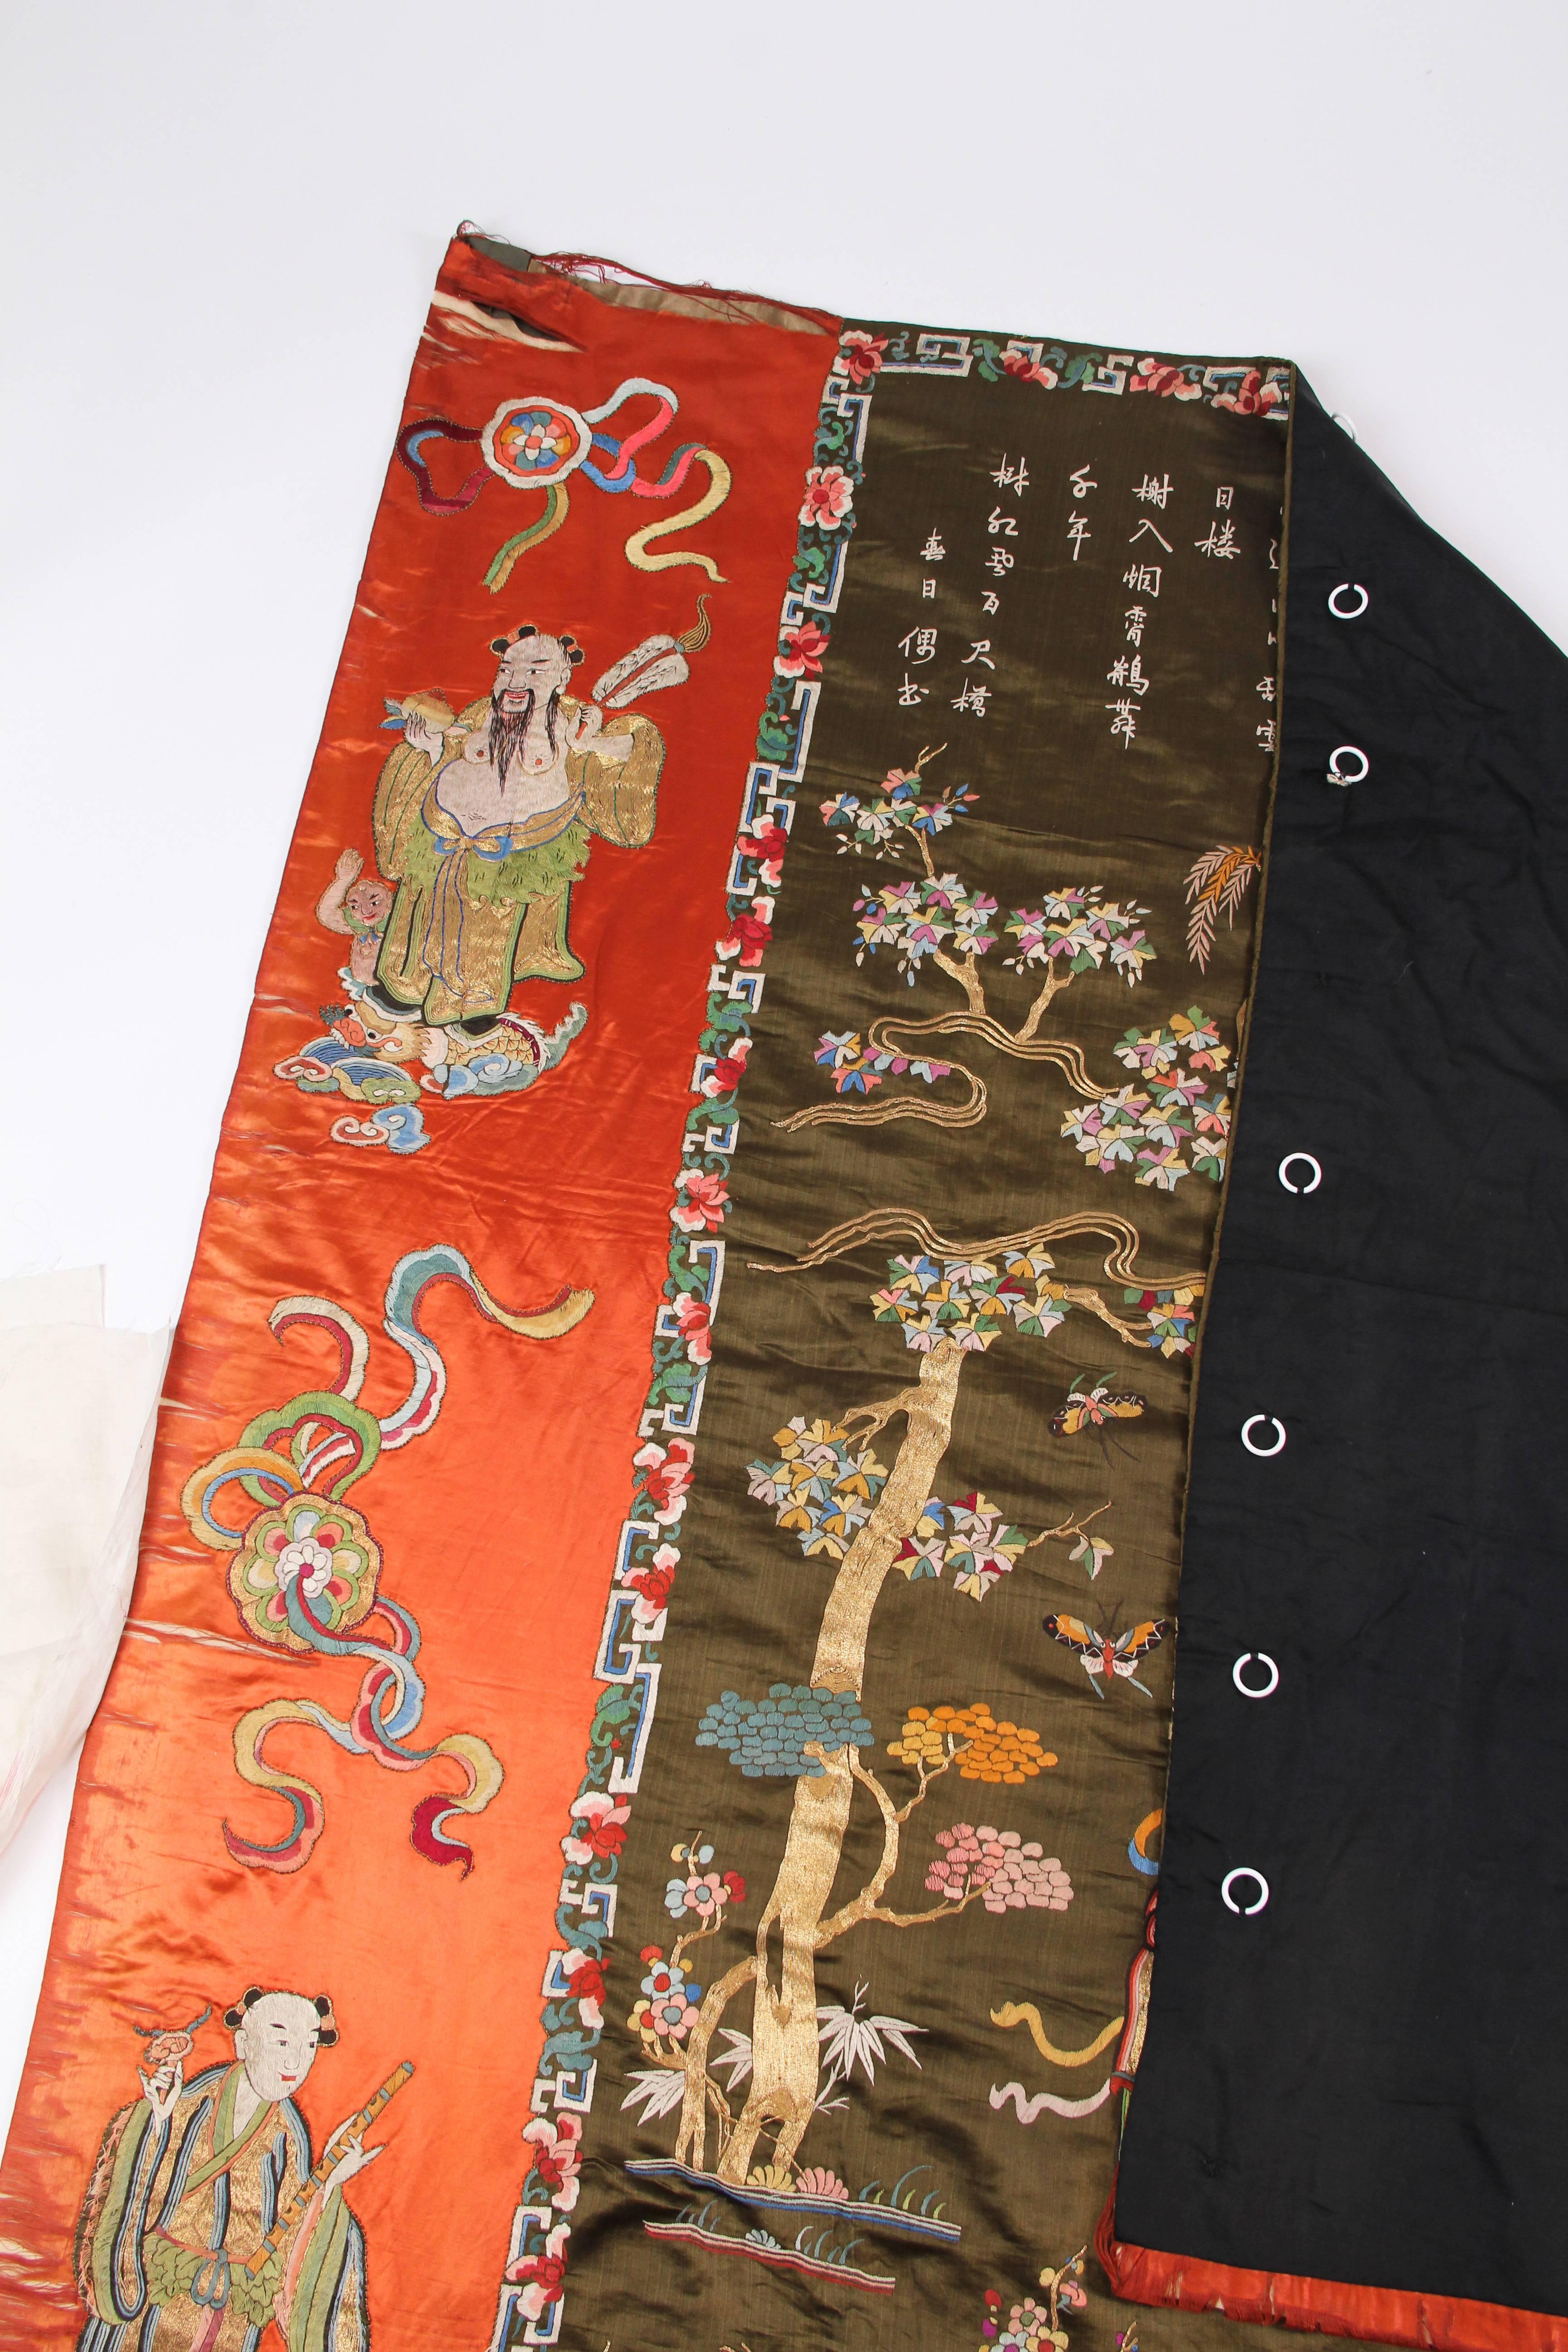 This is an incredible wall hanging made of embroidered silk satin. An antique piece from China, the traditional motifs show a rural scene picked out in perfect detail in polychrome silks. The hand embroidery is immaculate and shows a high level of